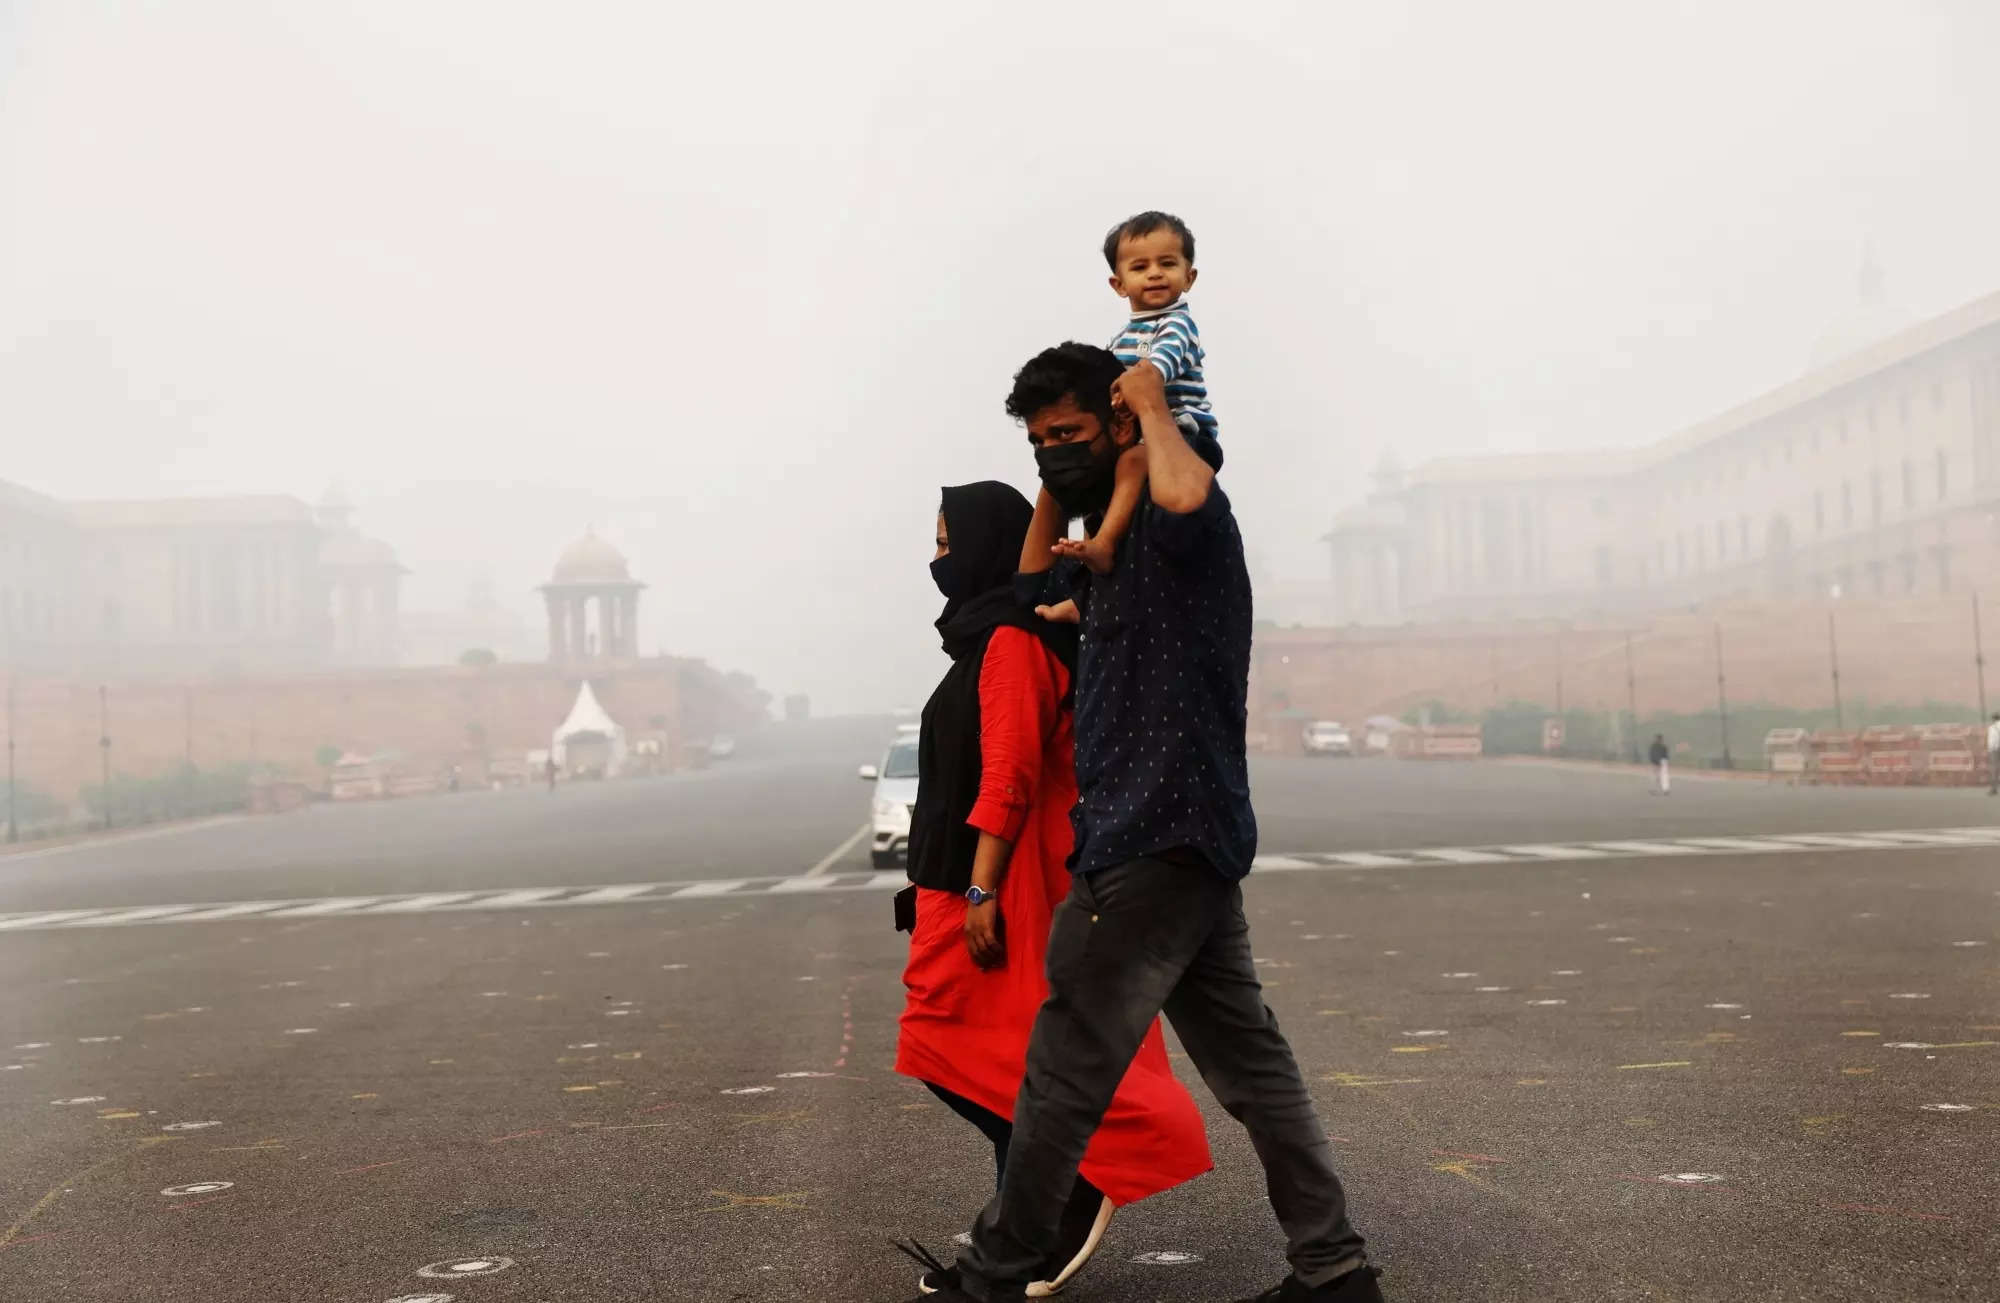 Delhi air quality remains in 'very poor' category; Air Quality Index in Noida at 393, Gurugram records 318